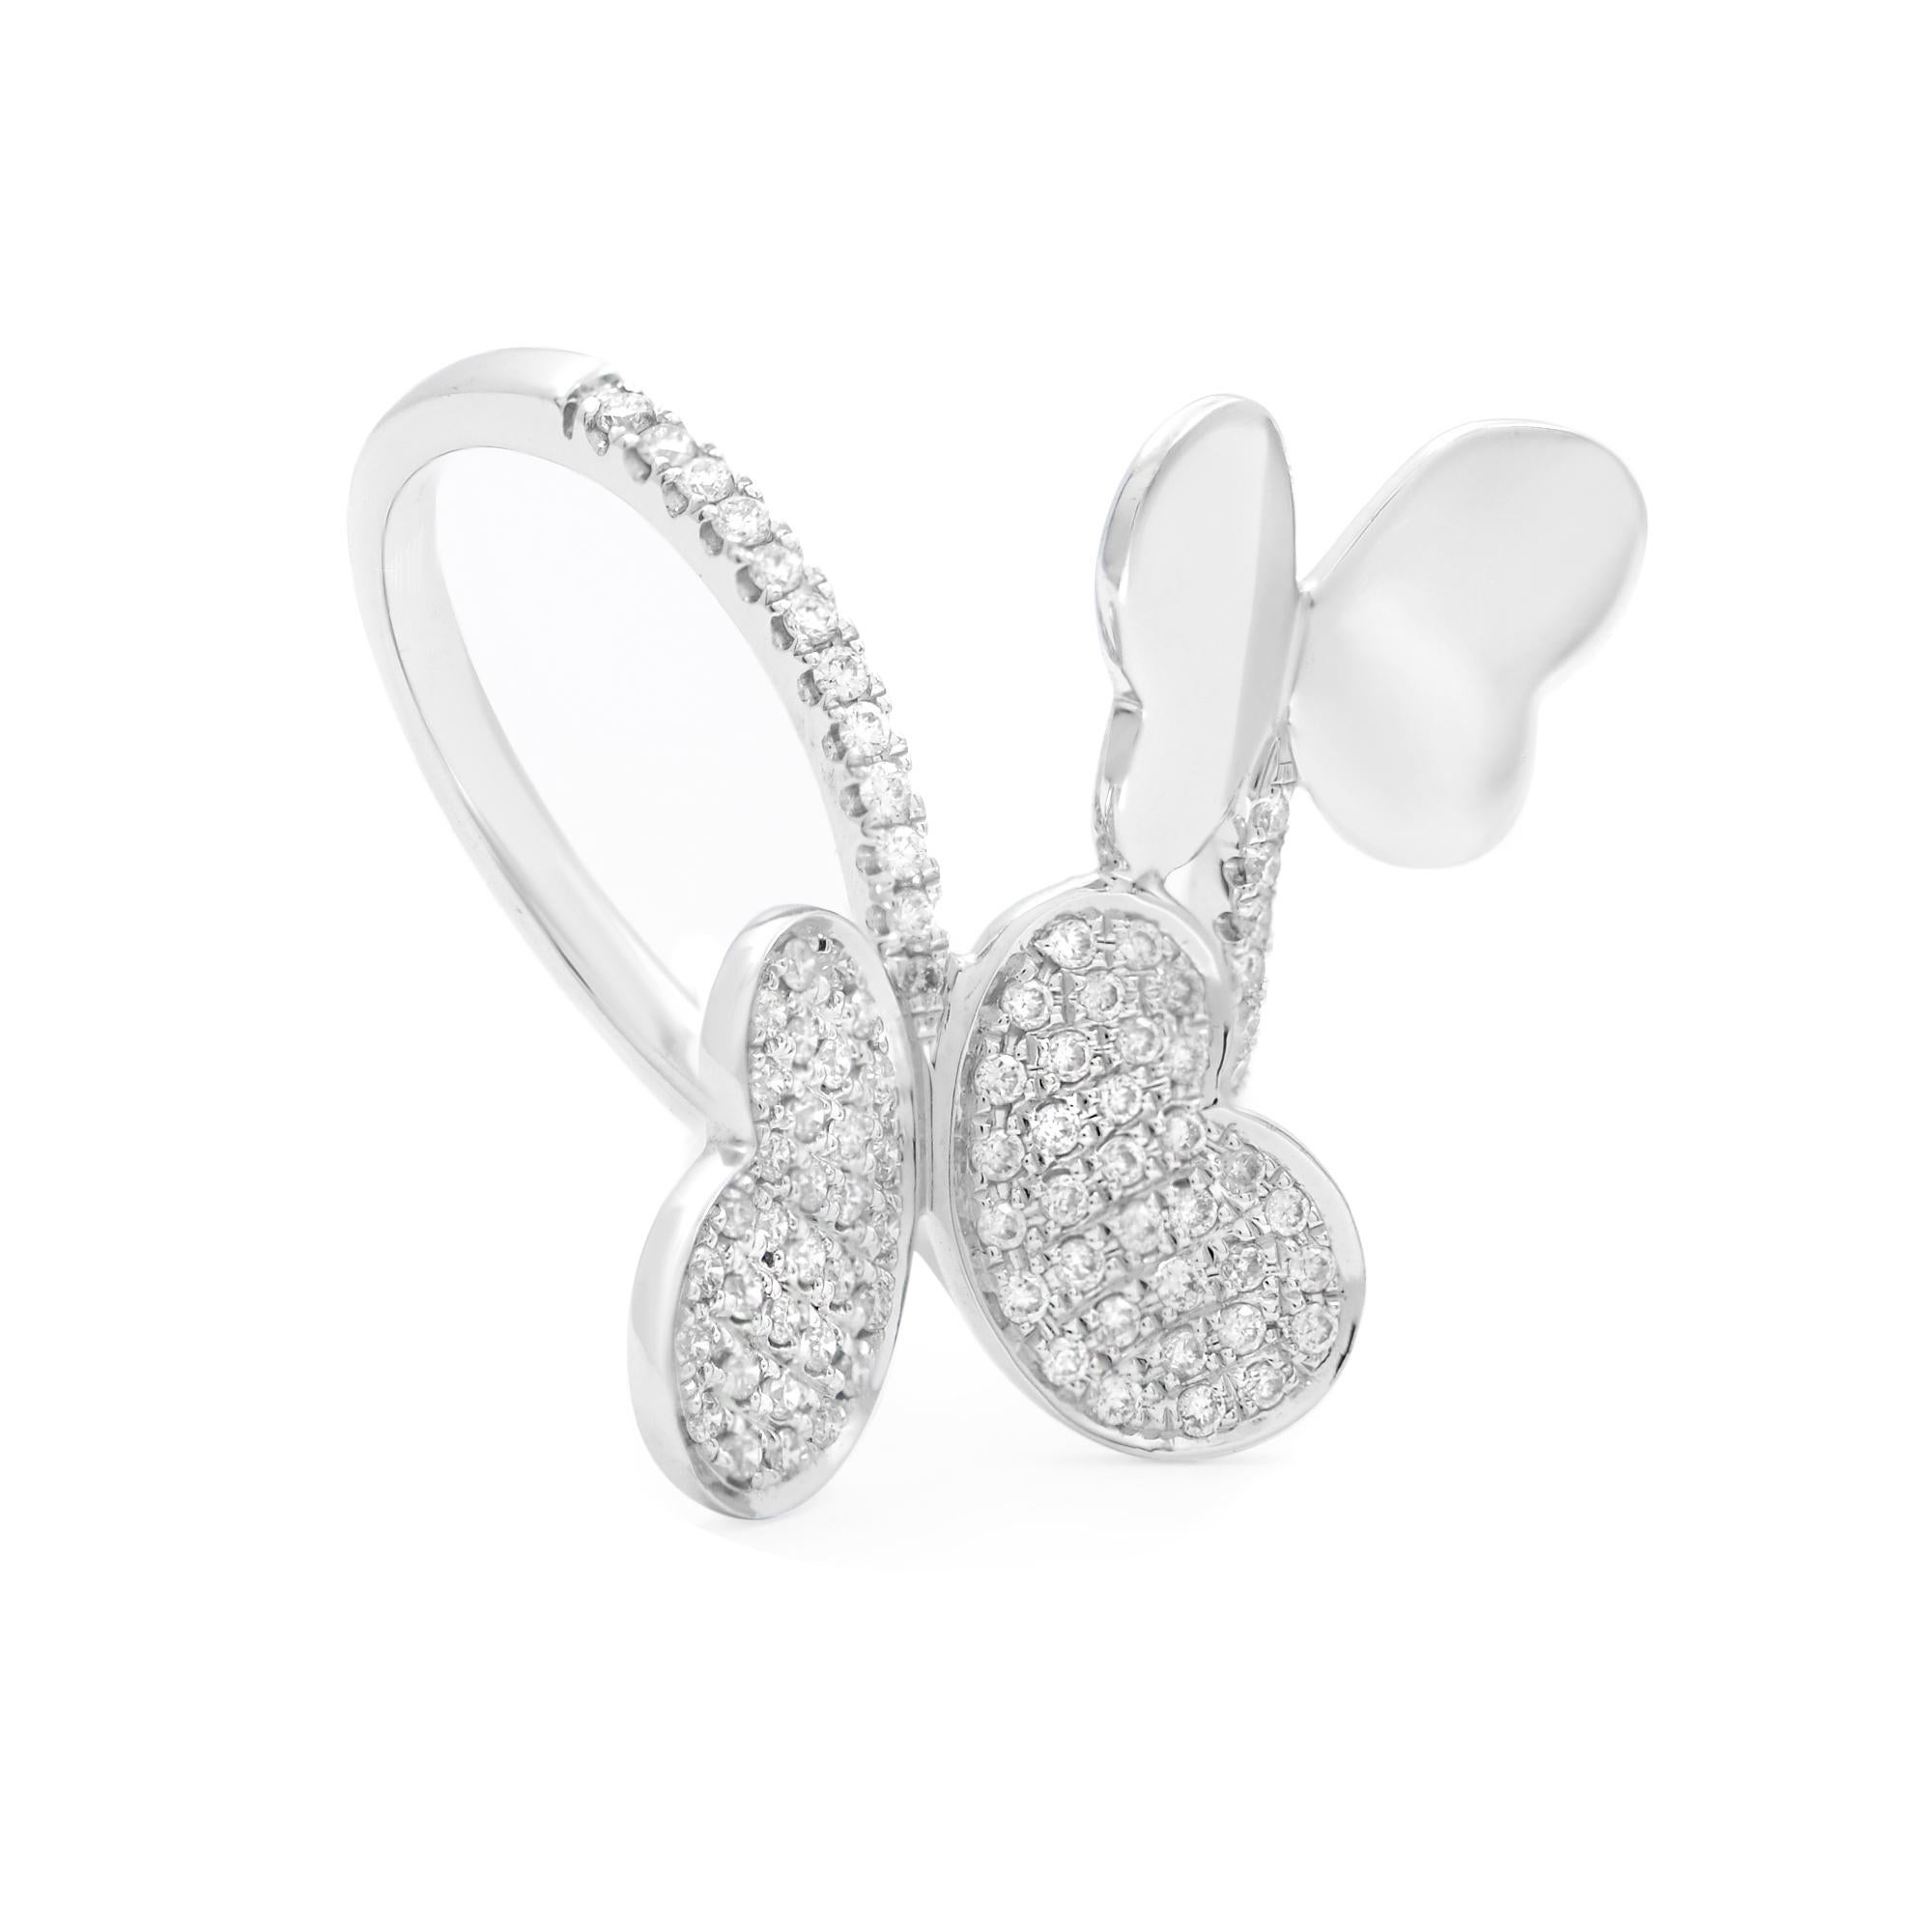 A fun and delicate criss cross diamond butterfly ring. The ring is designed with two beautifully crafted butterflies pave set with sparkling round cut diamonds. The butterflies face each other, one with diamonds and one without. A great pick for any